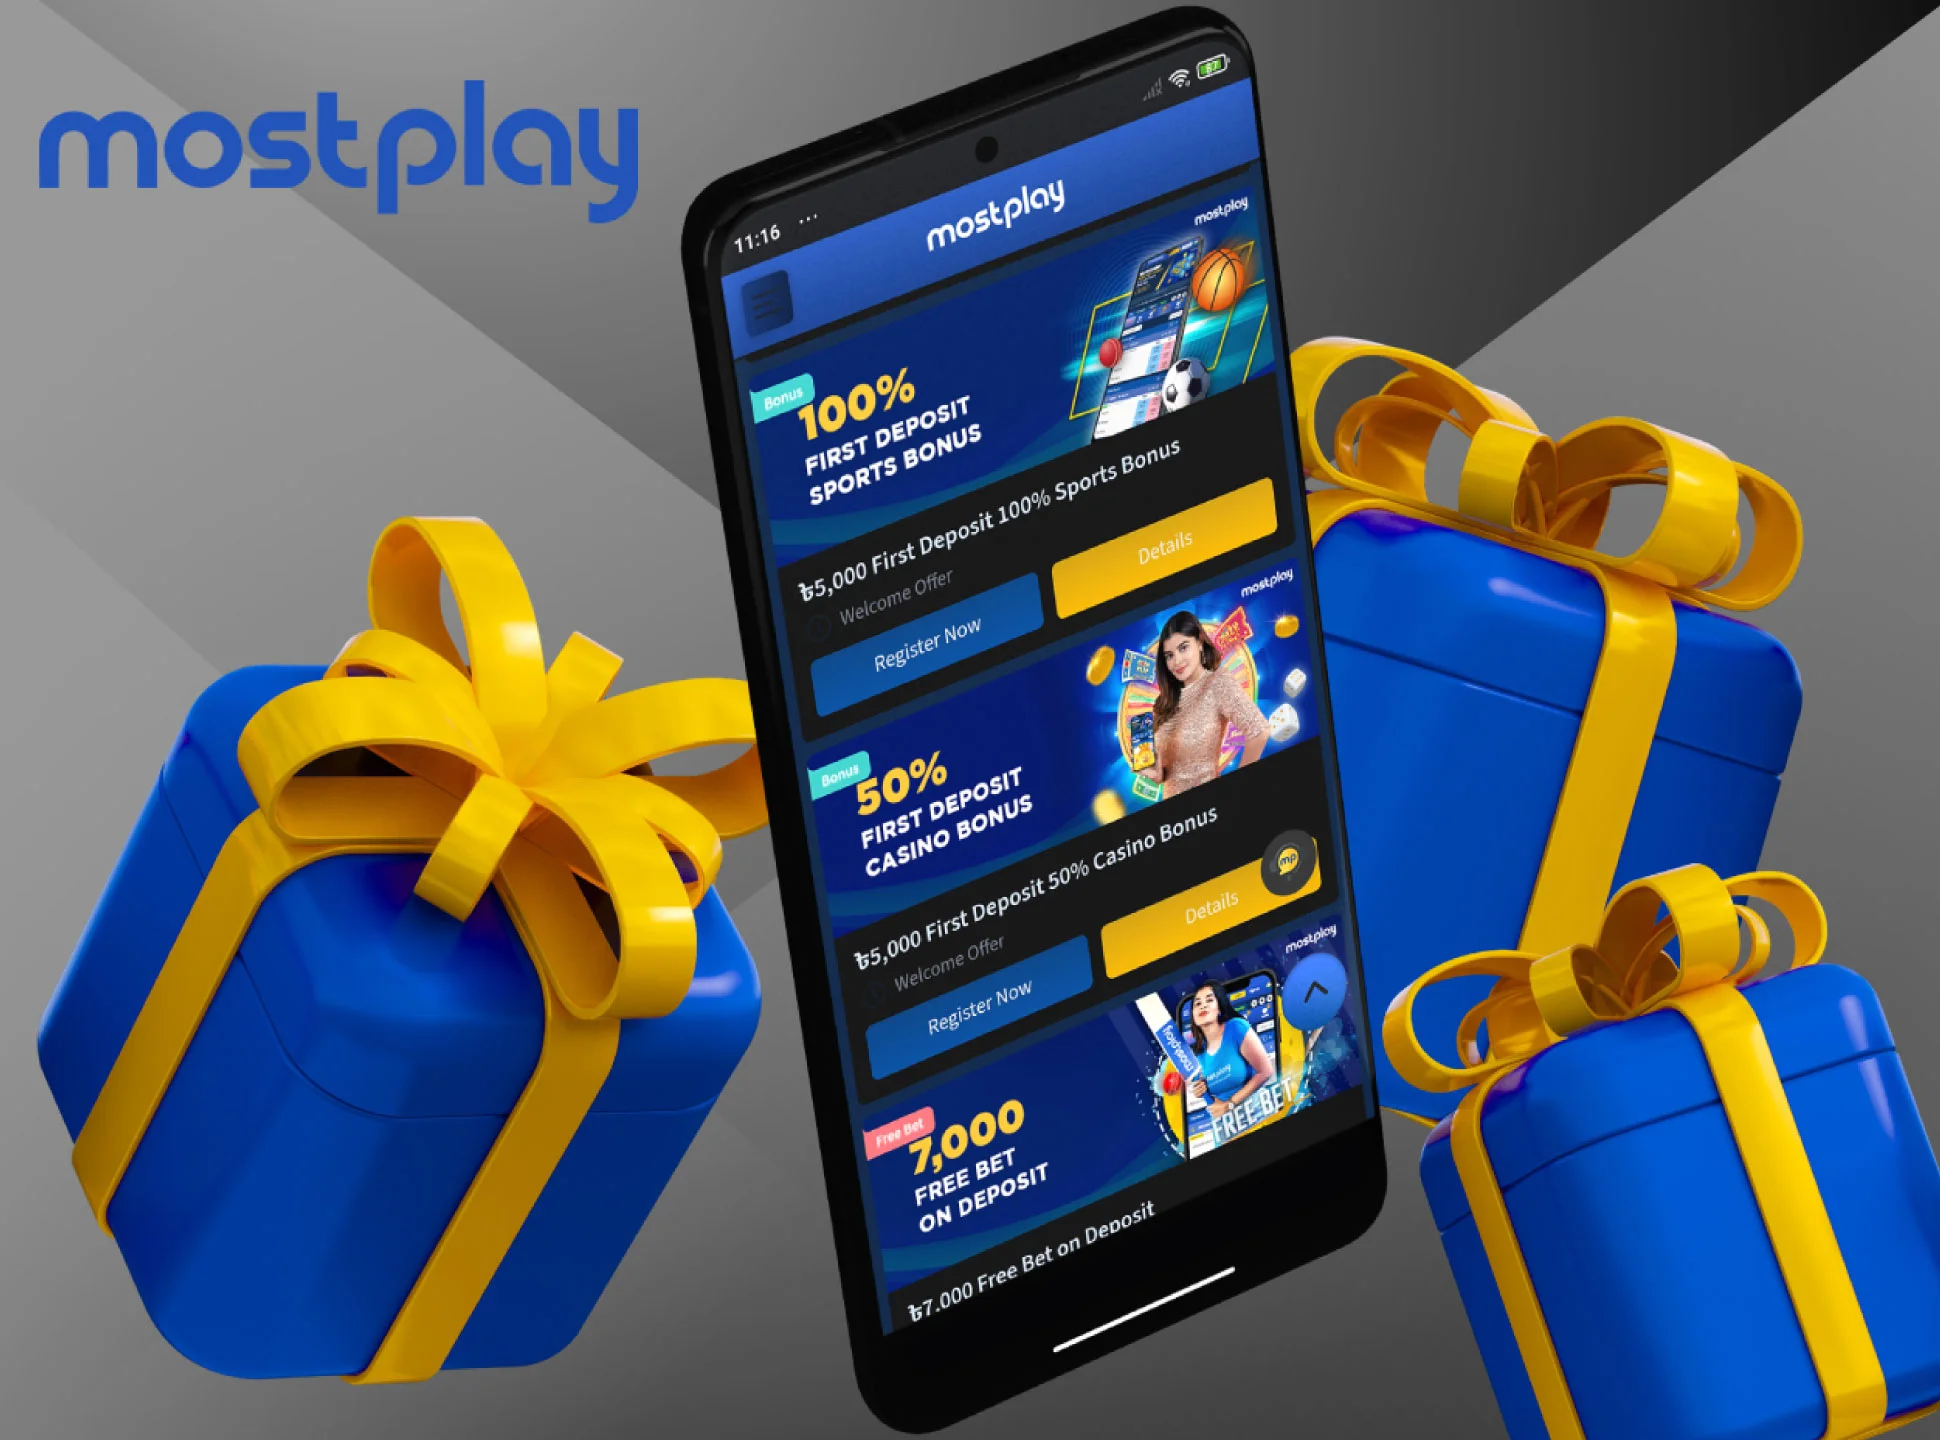 New users will receive a nice compliment from Mostplay for creating an account, it can be used in both casino and sports betting.